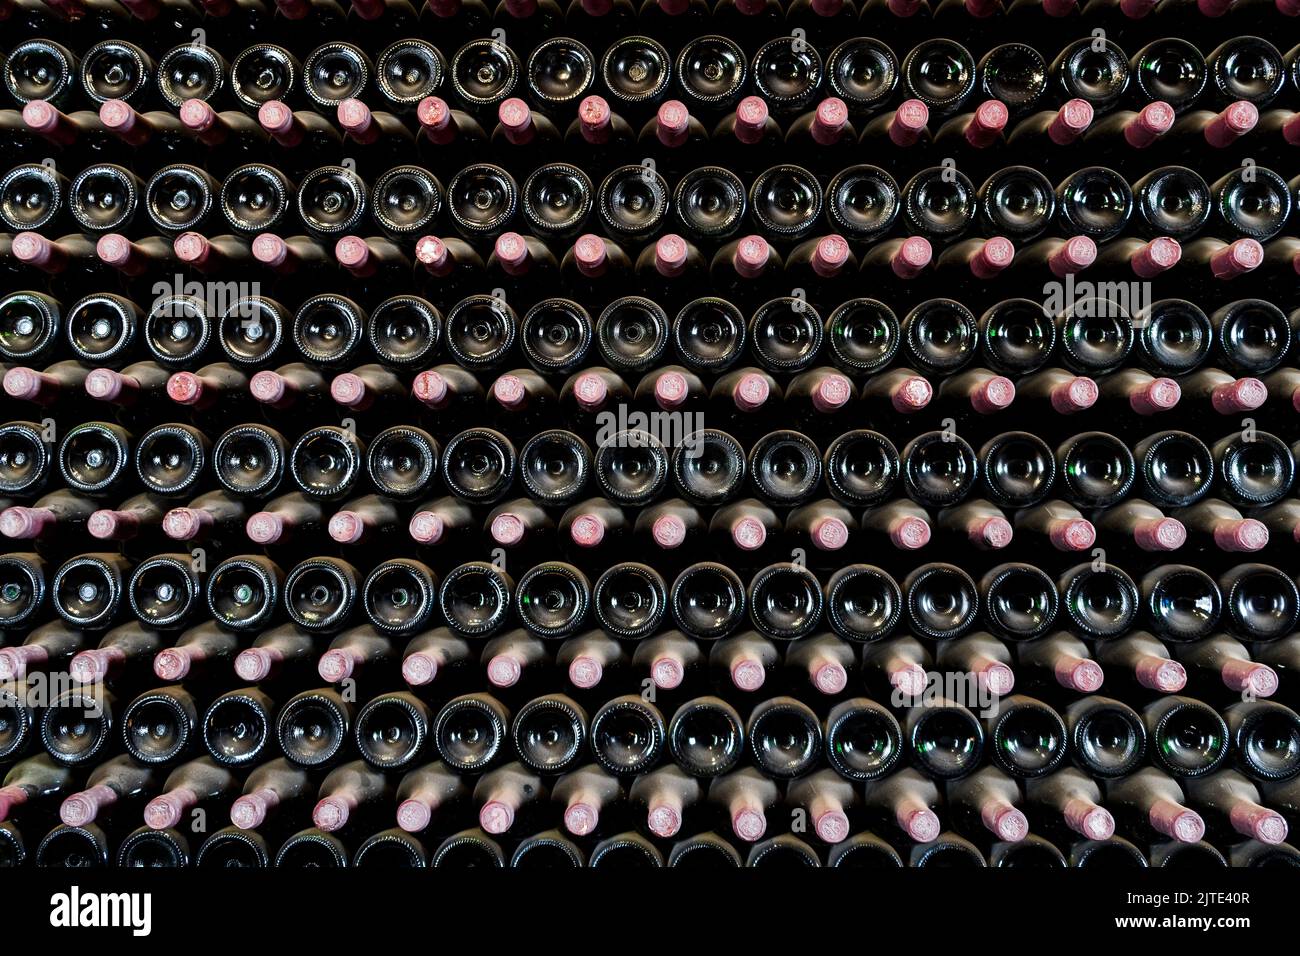 Many bottles in a row stacked on a winery shelf, Lanzarote, Spain Stock Photo